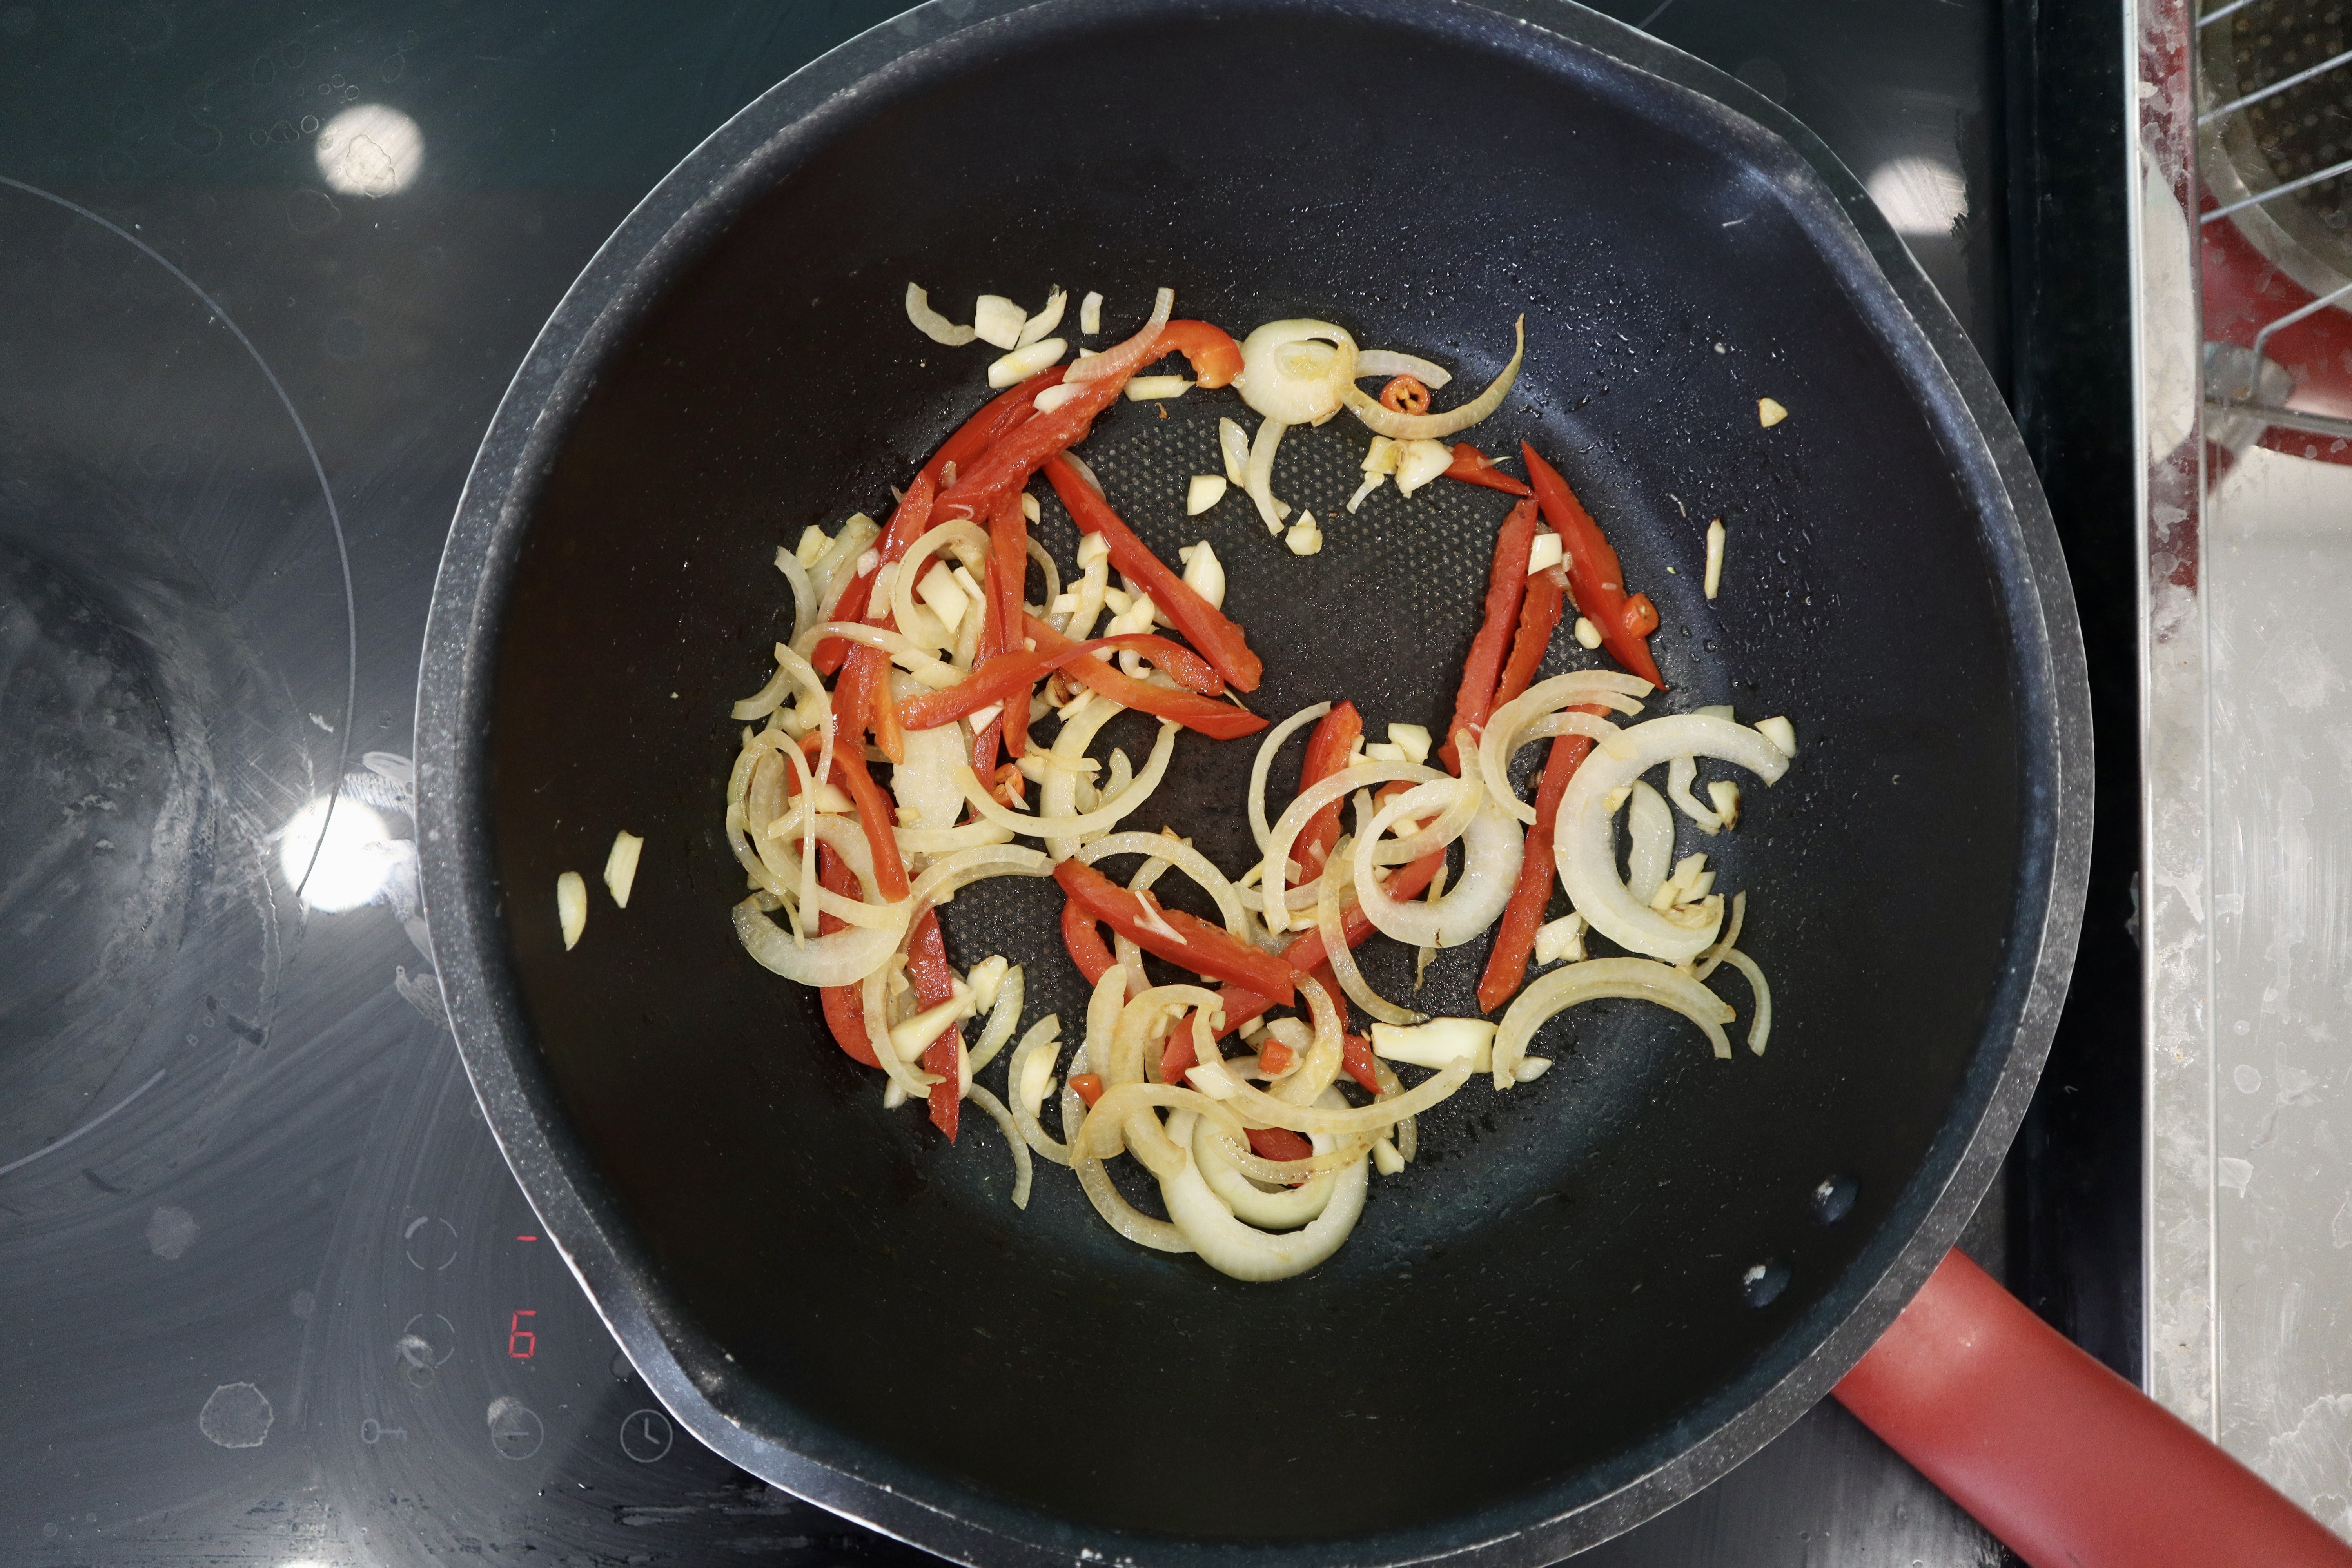 Sautéed onion, garlic, chilli, and red pell pepper in a pan